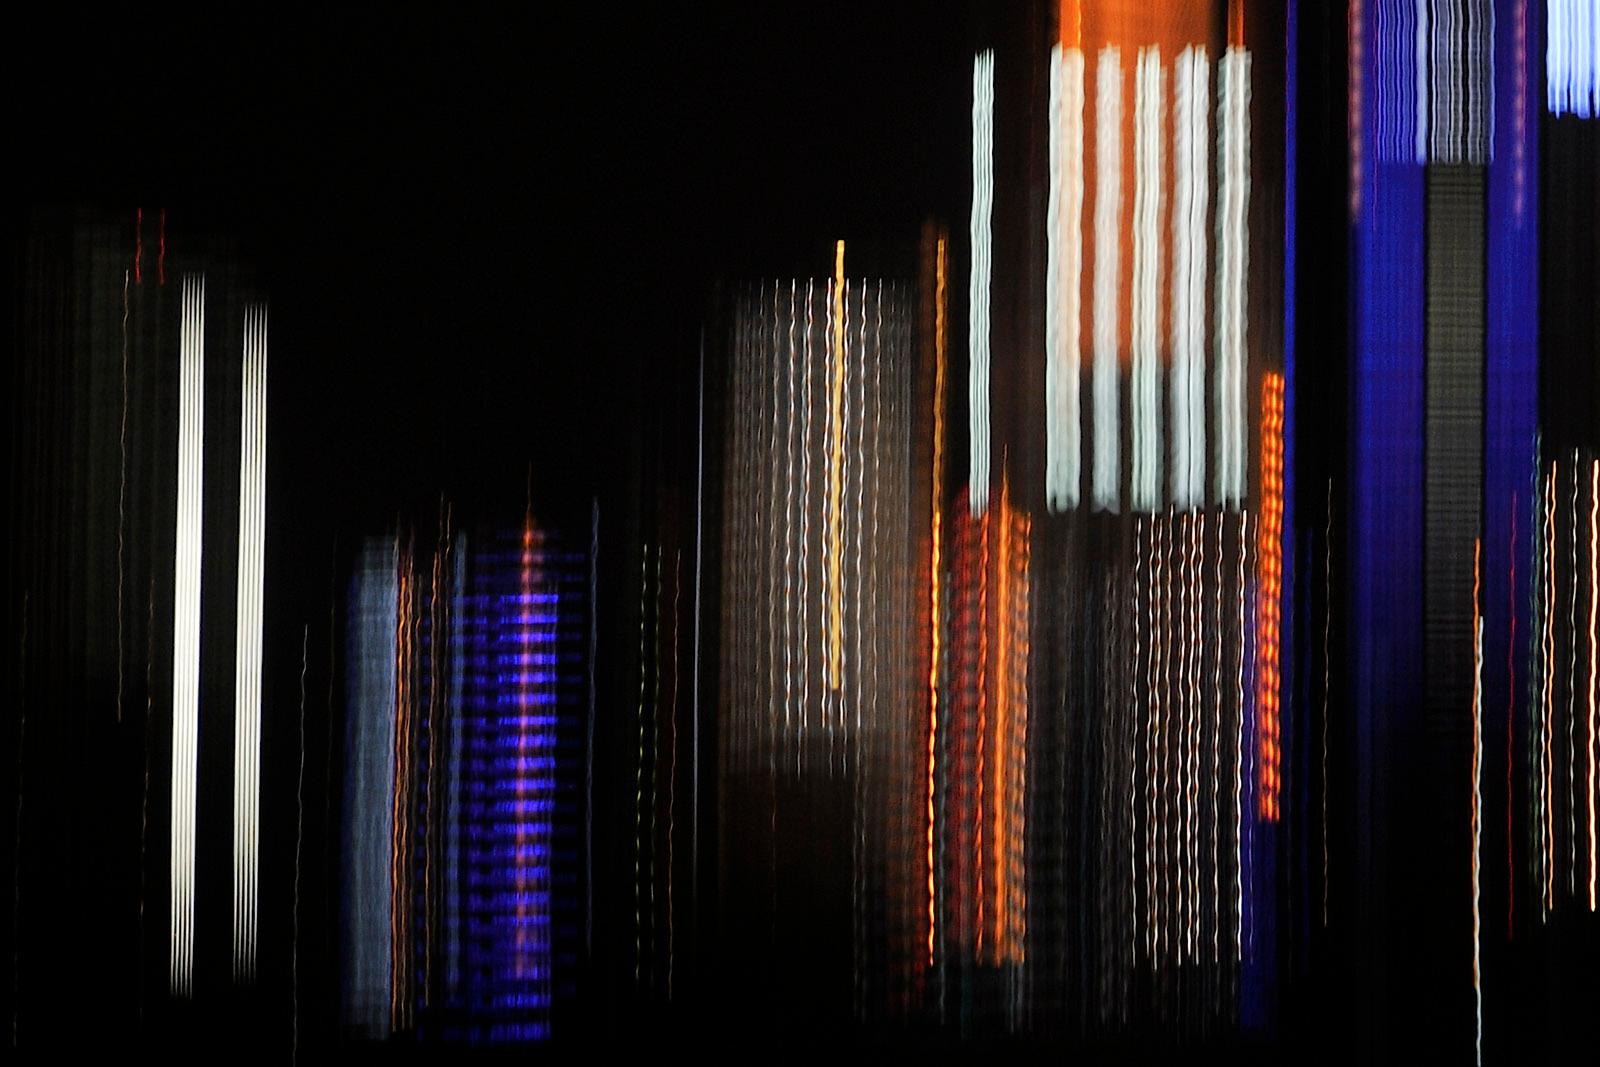 Future city 1-Signed limited edition abstract print, Large format contemporary - Photograph by Michael Banks